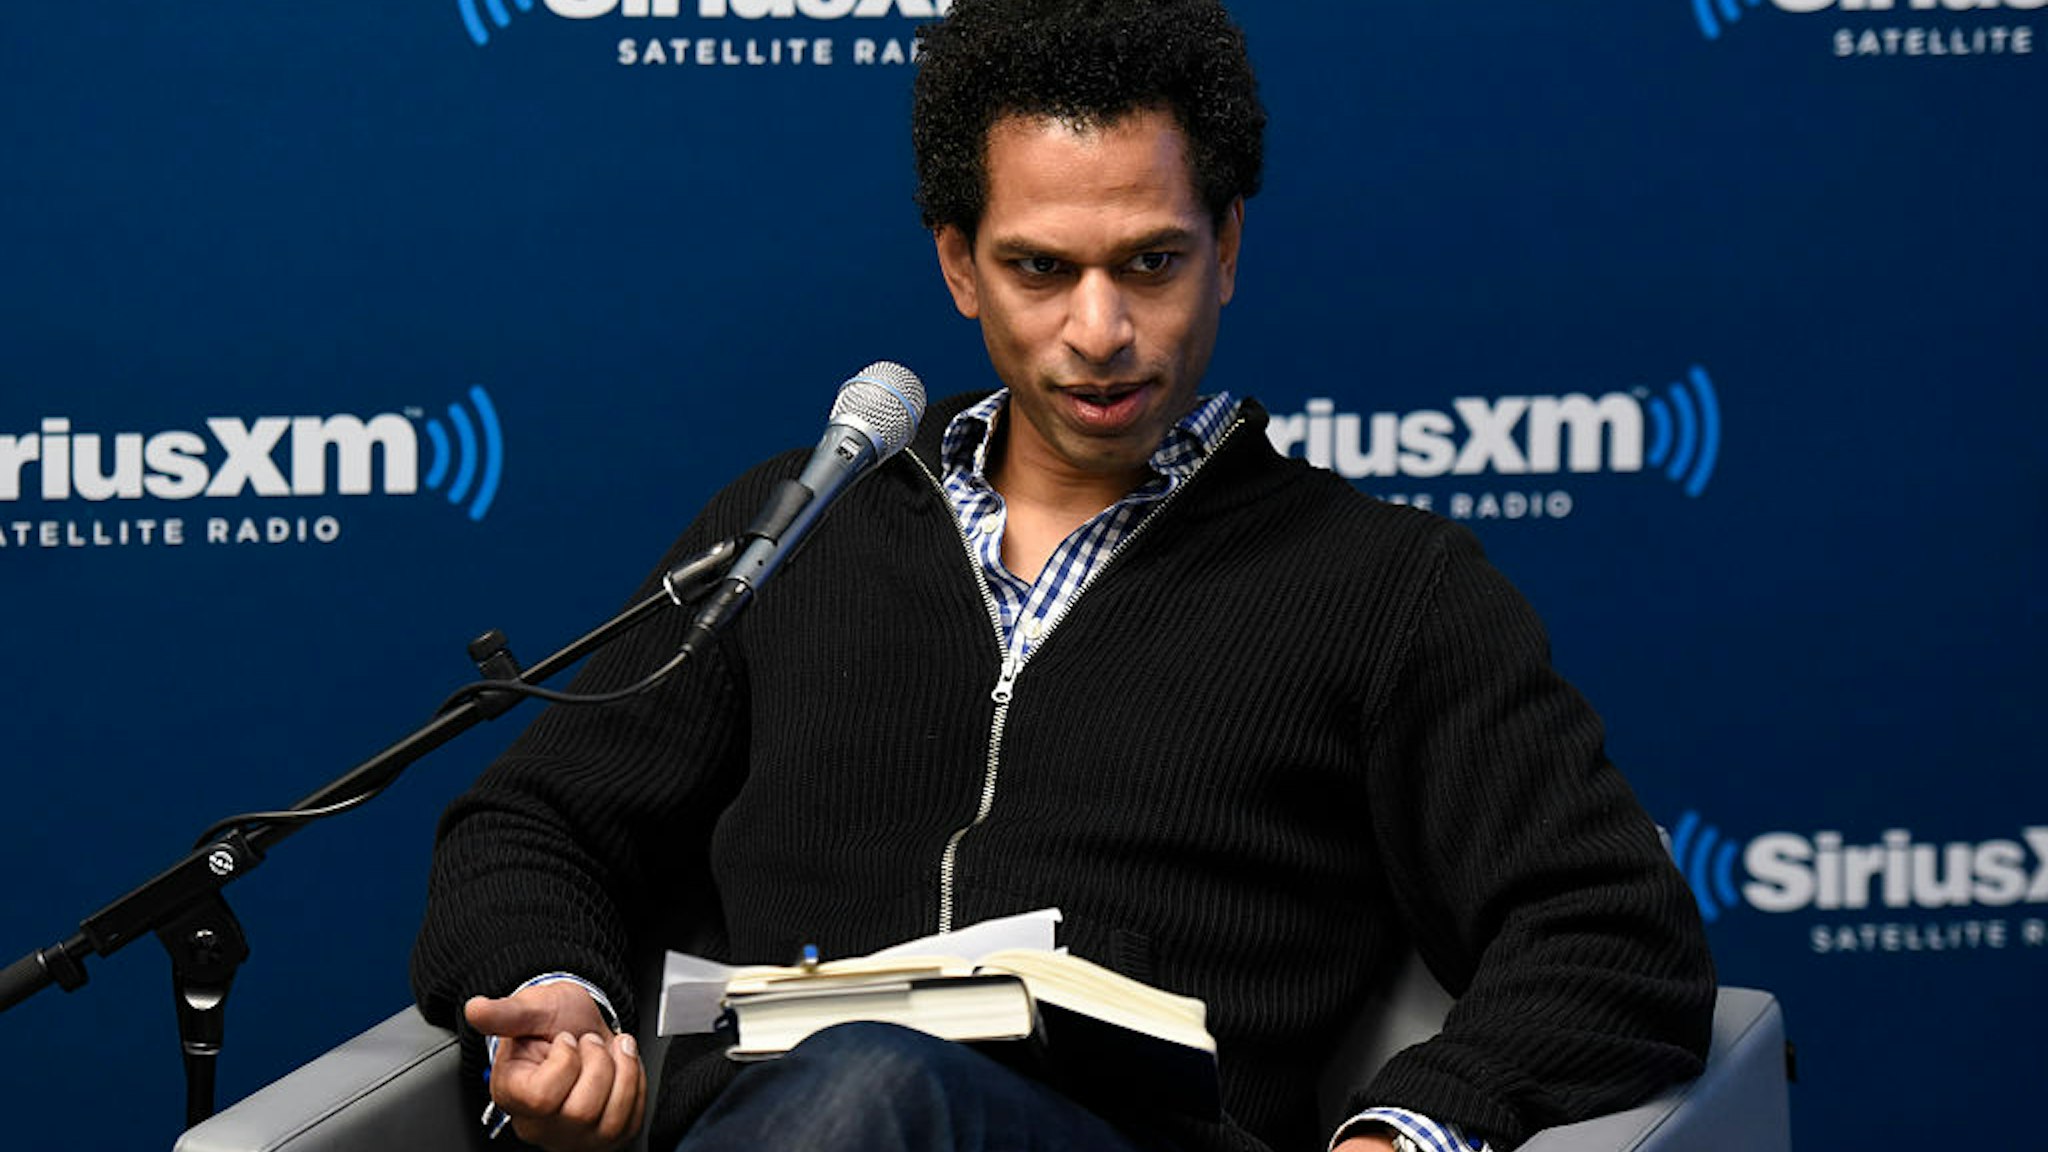 Toure takes part in SiriusXM's 'Town Hall' with L.A. Reid at the SiriusXM Studios on February 1, 2016 in New York City.